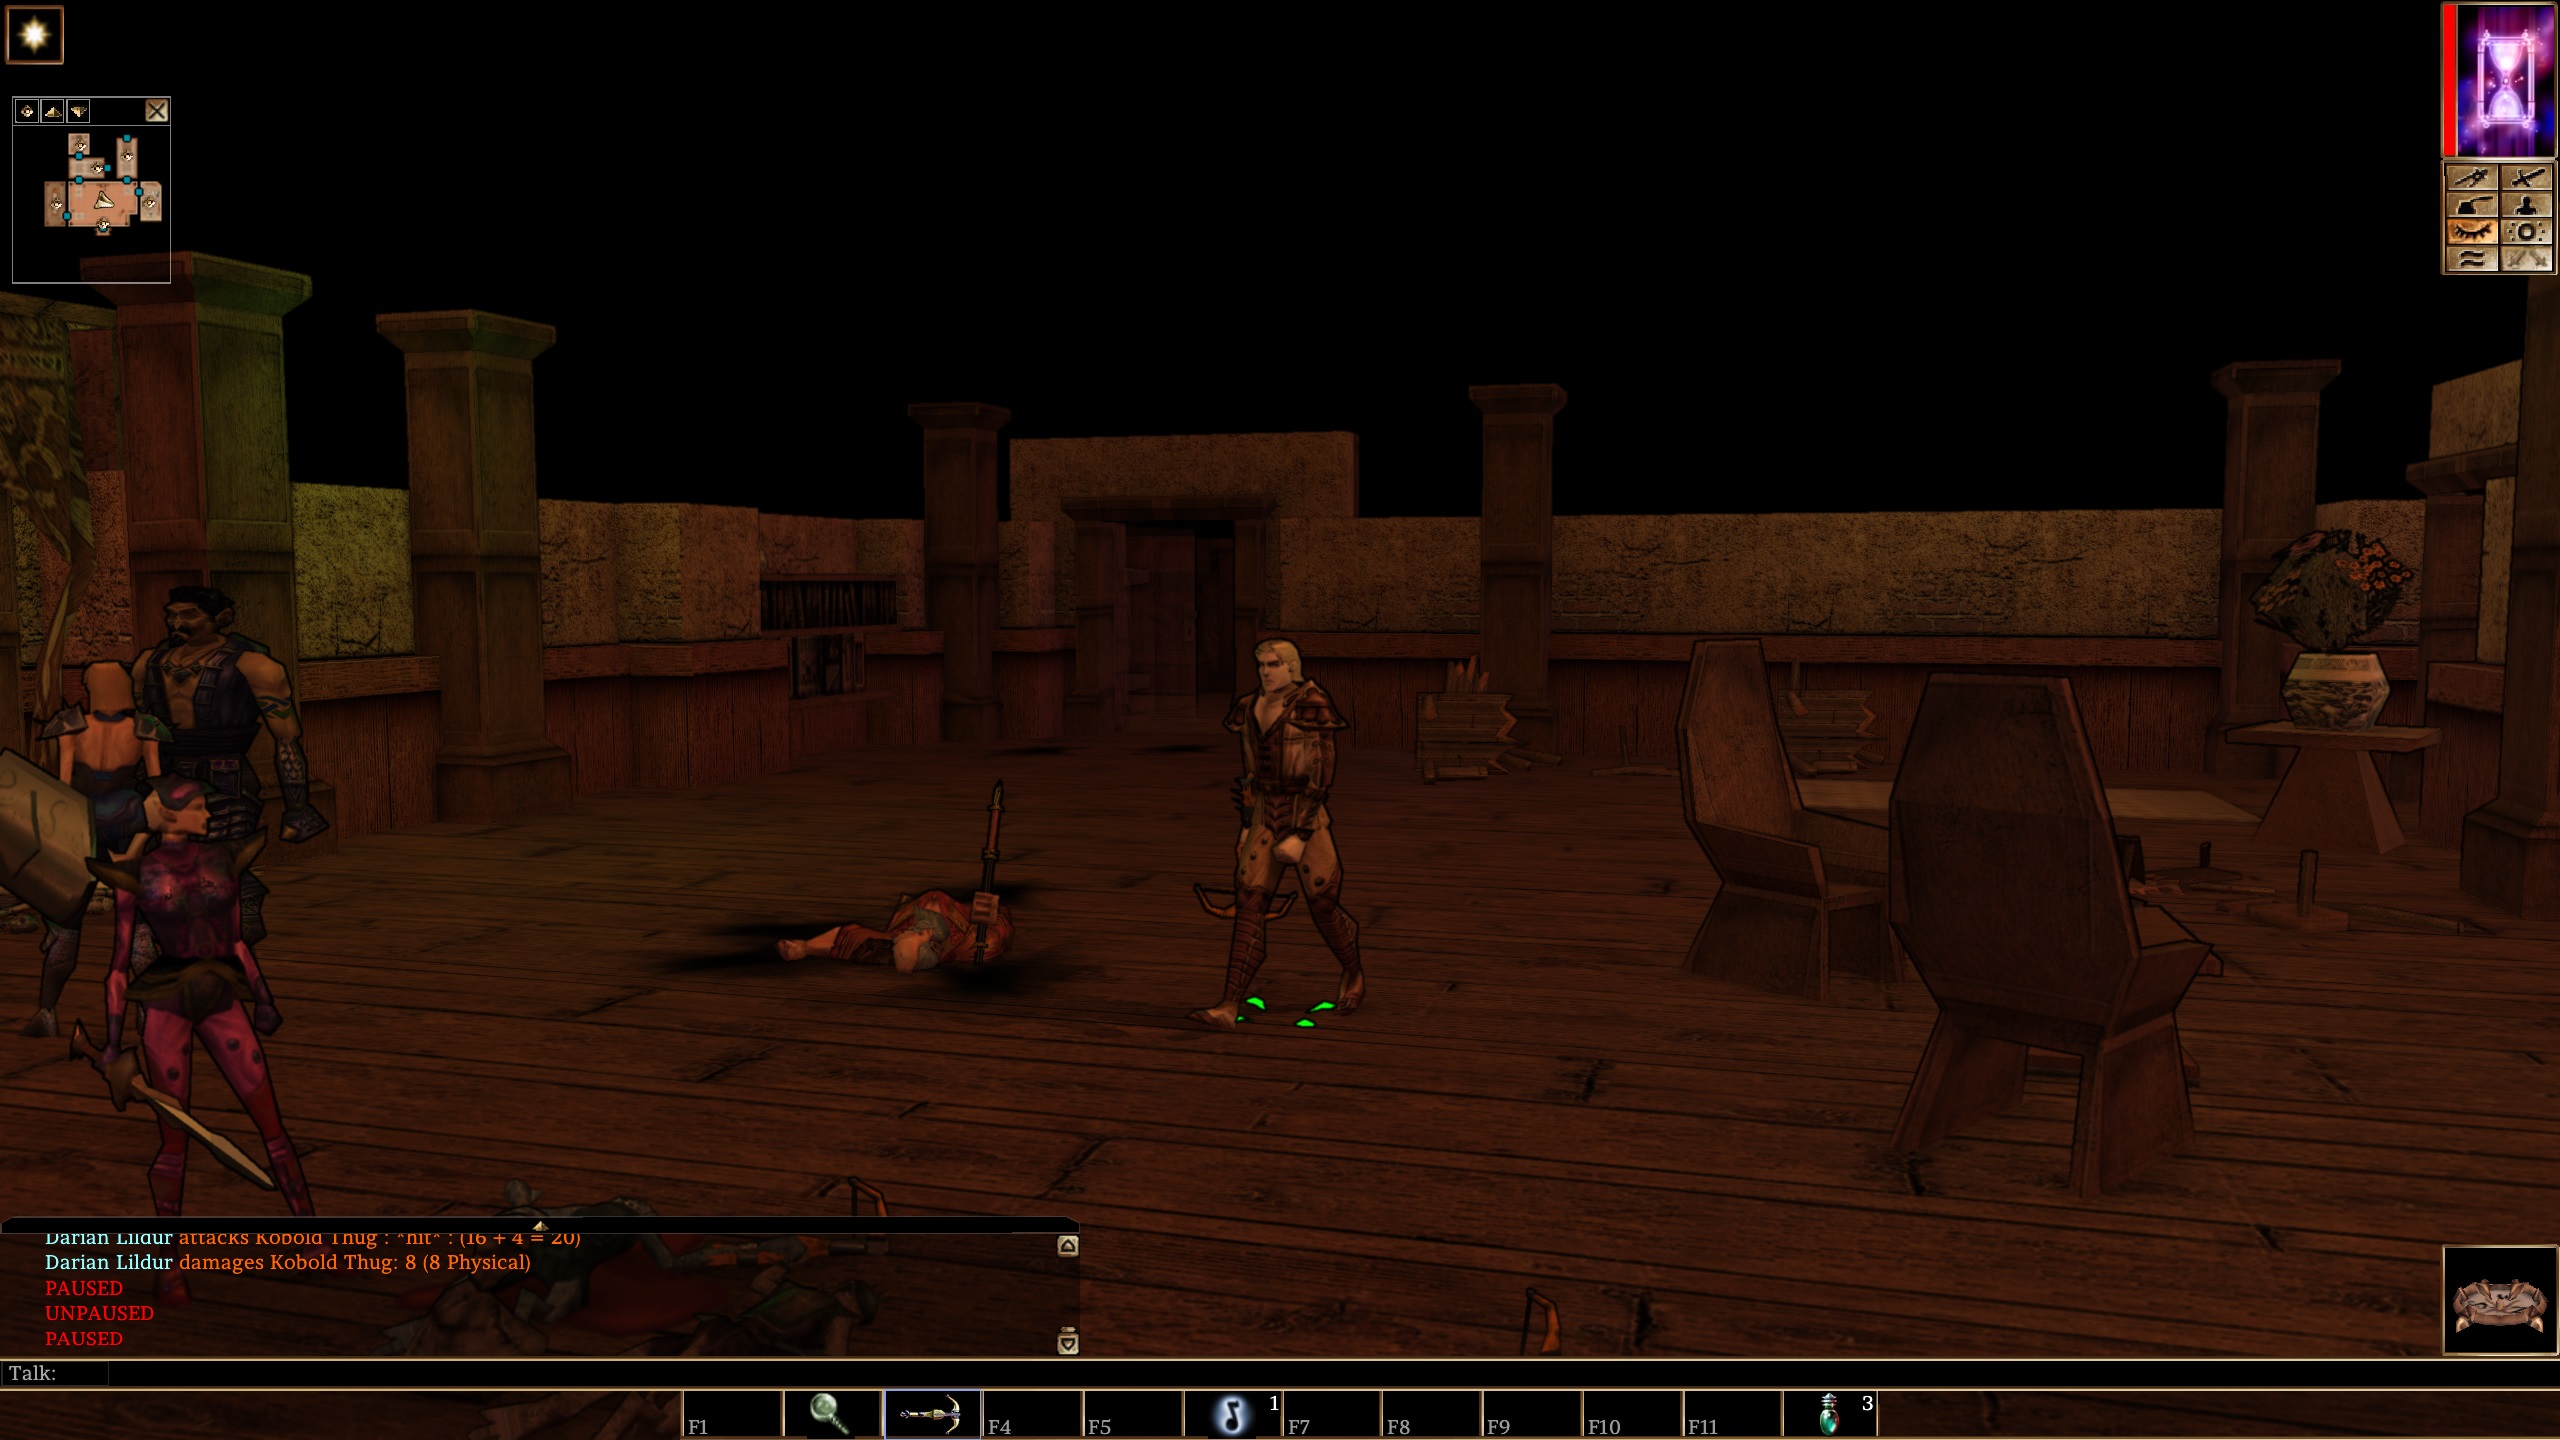 Neverwinter Nights interior with new toon mode enabled, adding thick comic book lines around many characters and objects